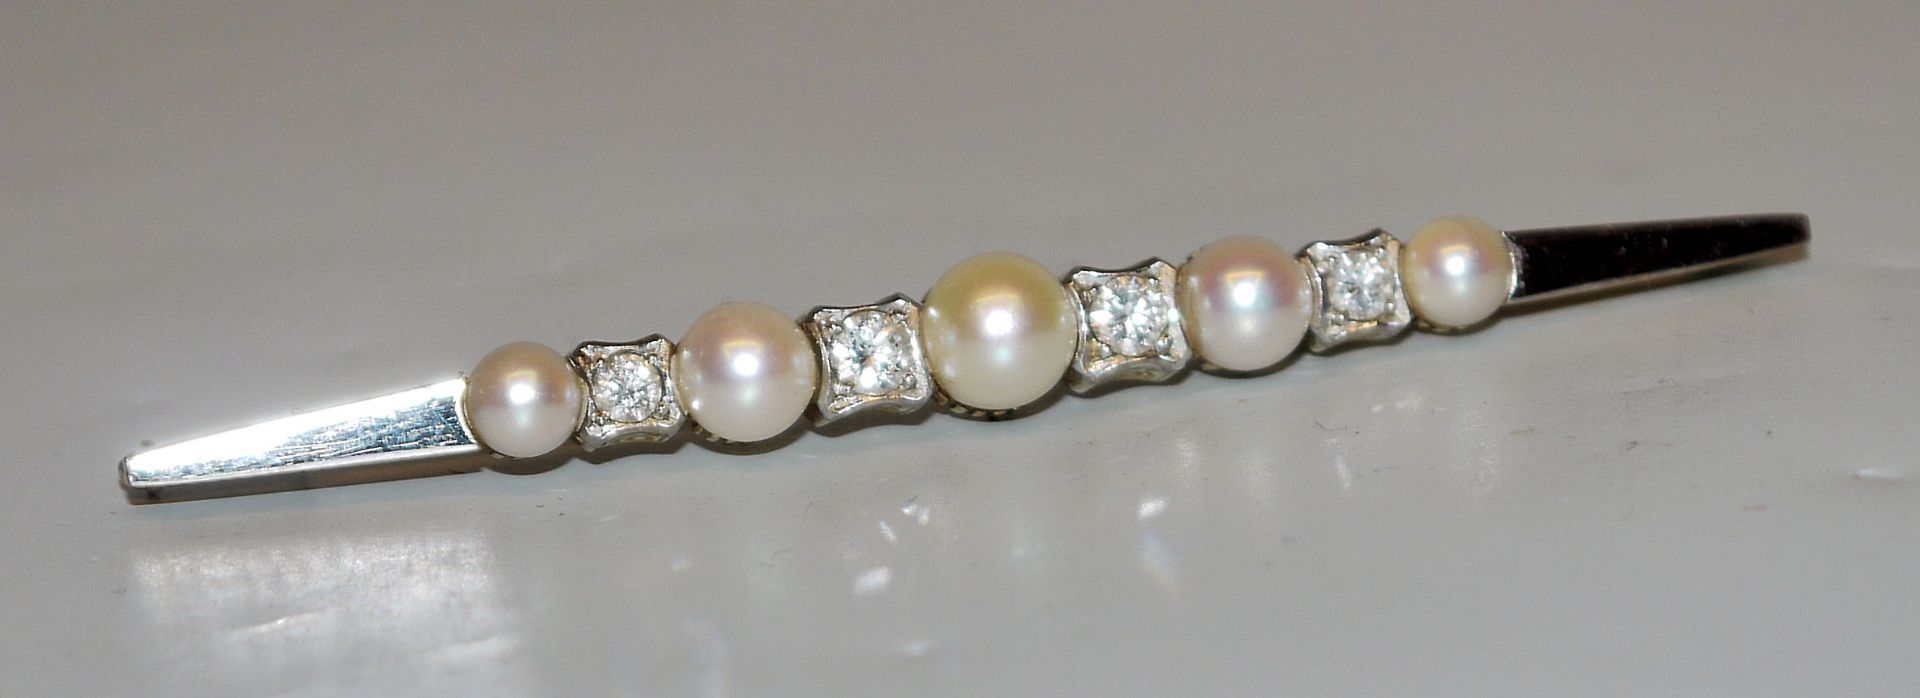 Stick brooch with diamonds and pearls, gold circa 1920/30